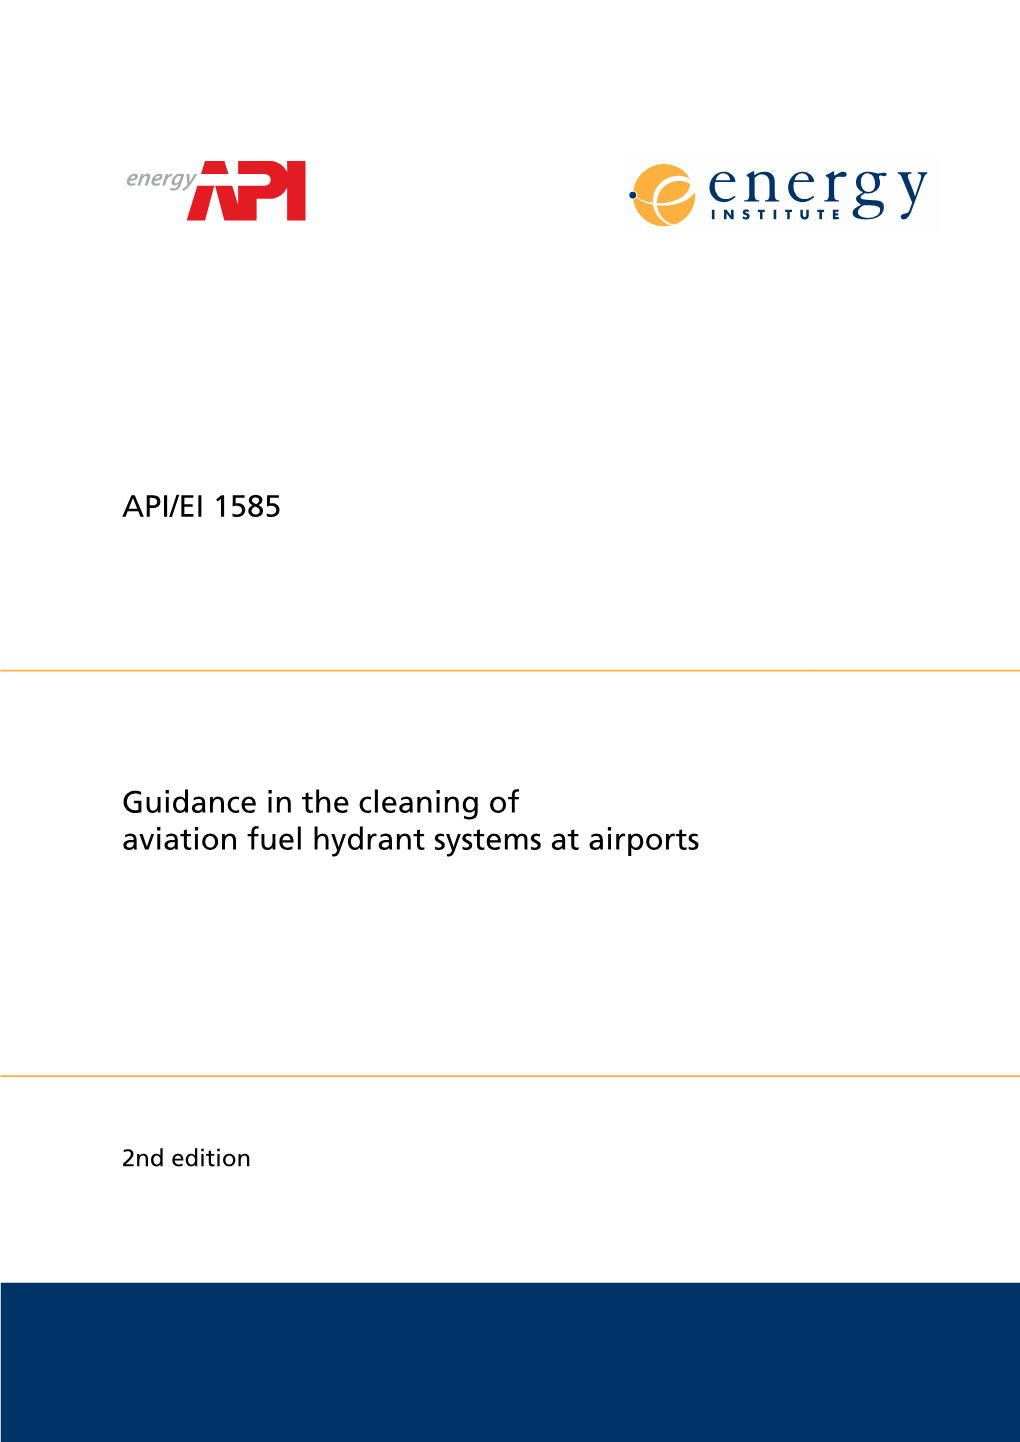 API/EI 1585 Guidance in the Cleaning of Aviation Fuel Hydrant Systems At